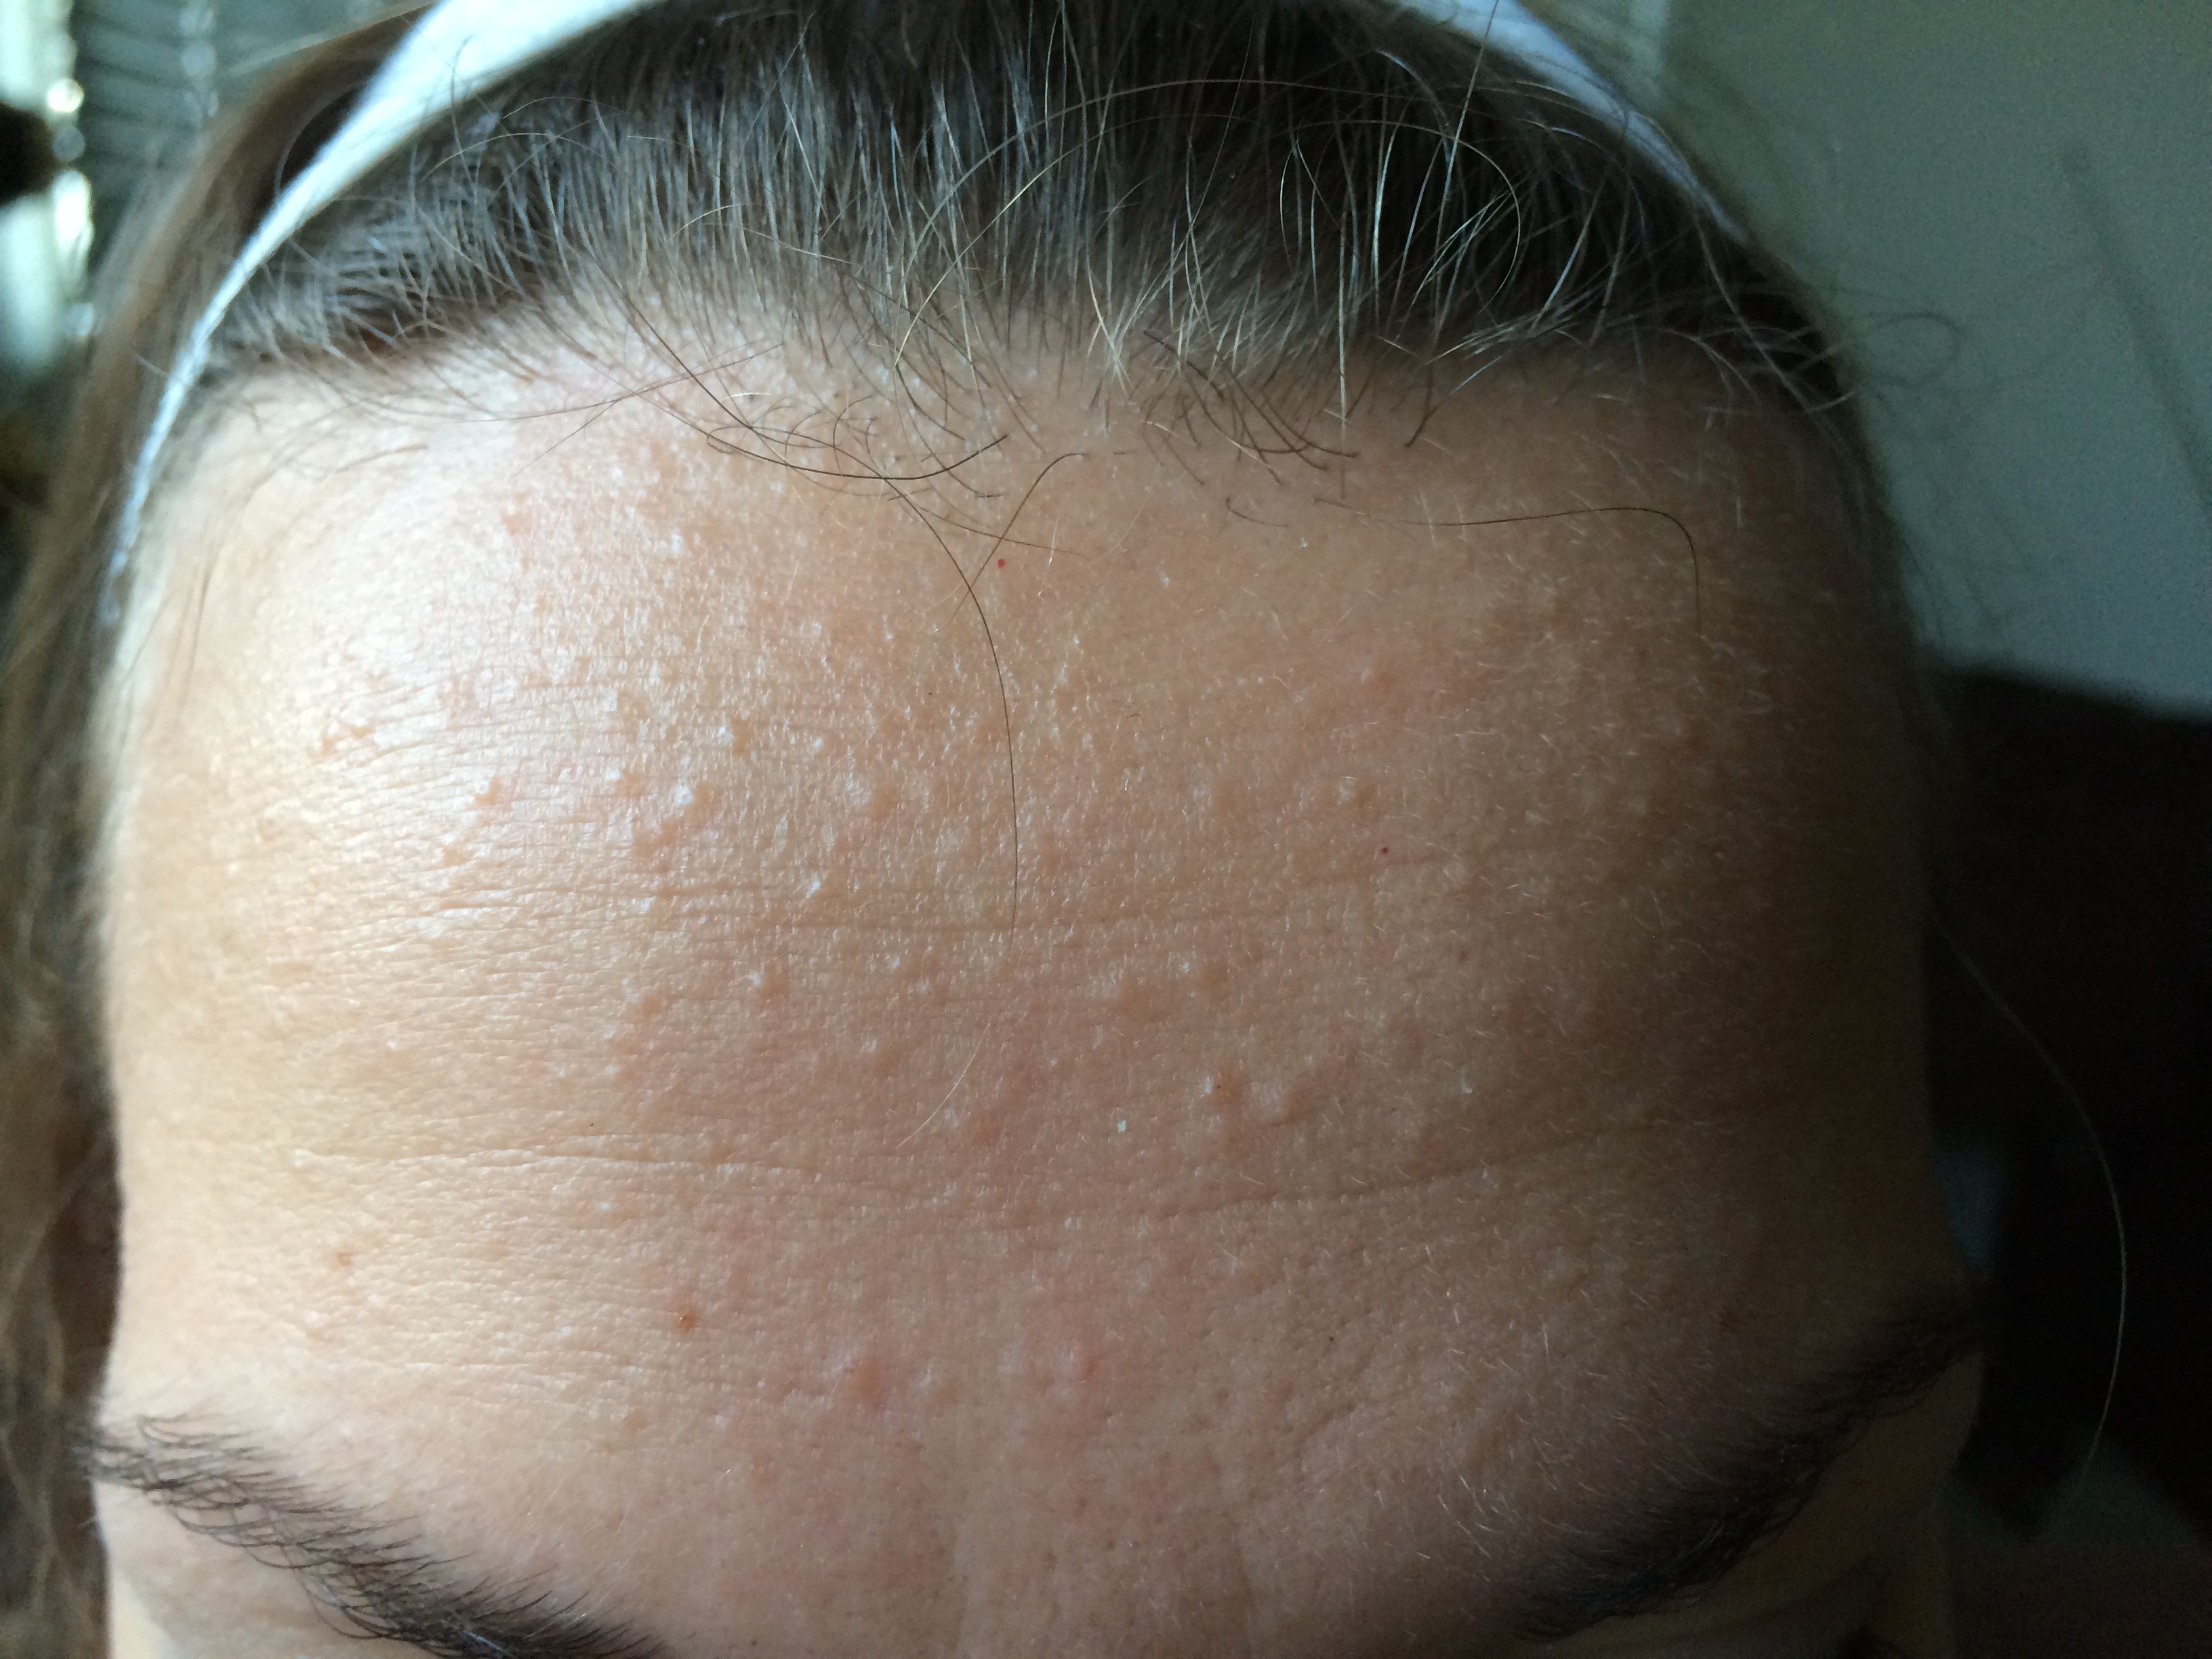 Tiny Bumps On Forehead Small Pimples Small Bumps On F